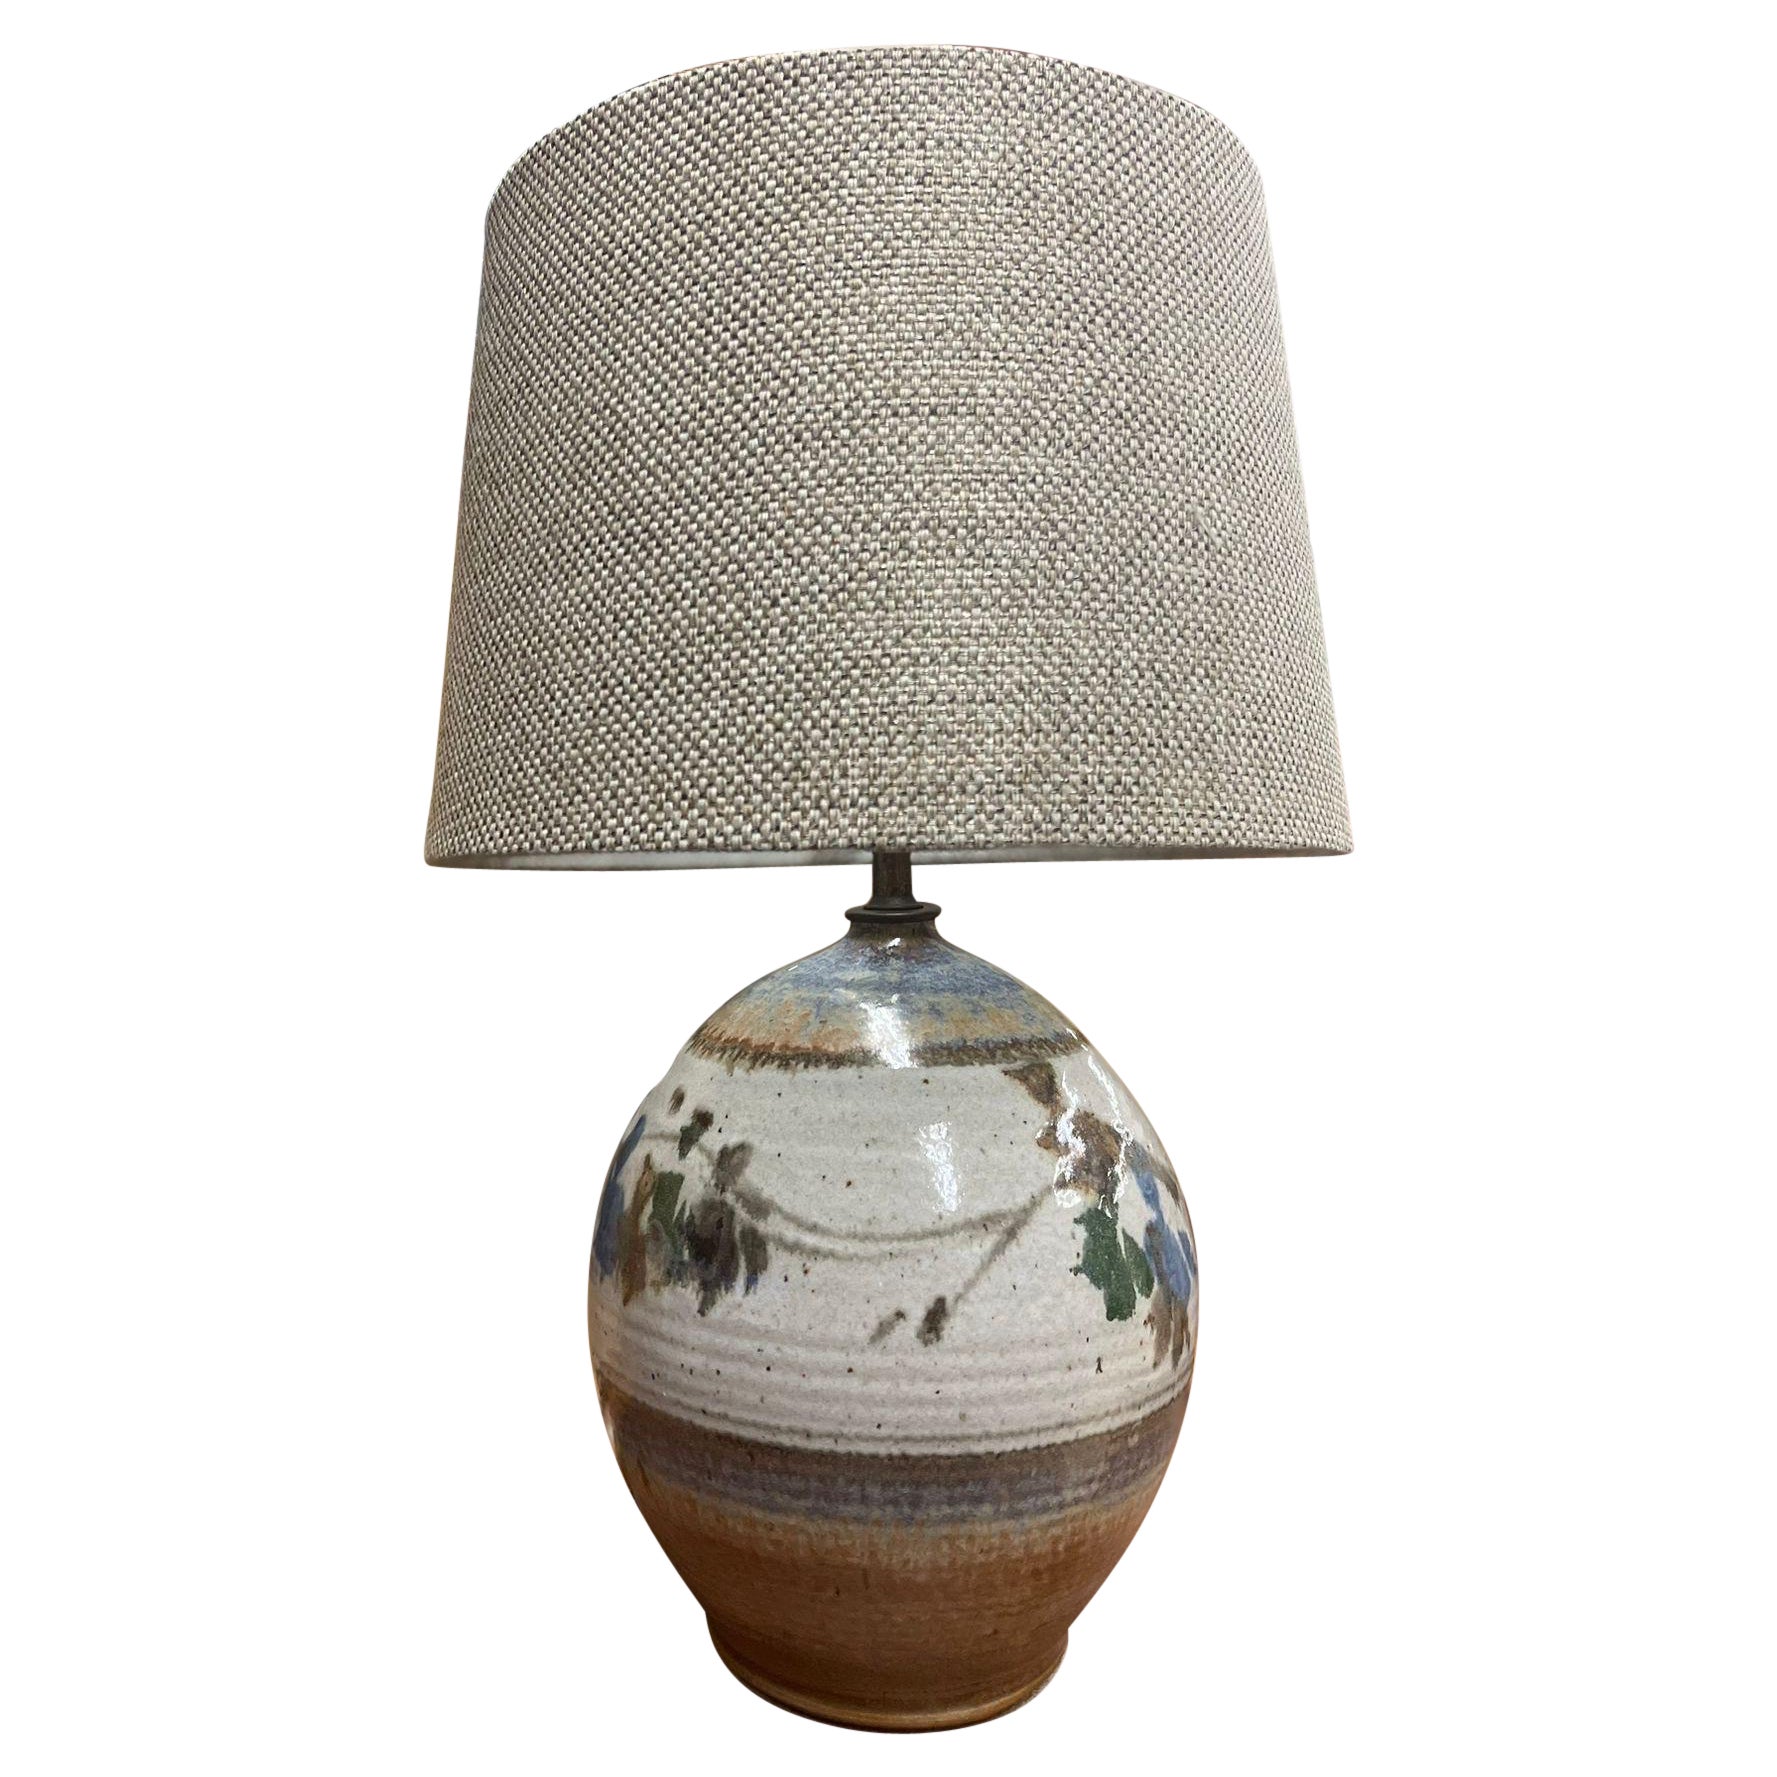 Vintage Studio Pottery Lamp With Fabric Shade. Circa 1970s. For Sale